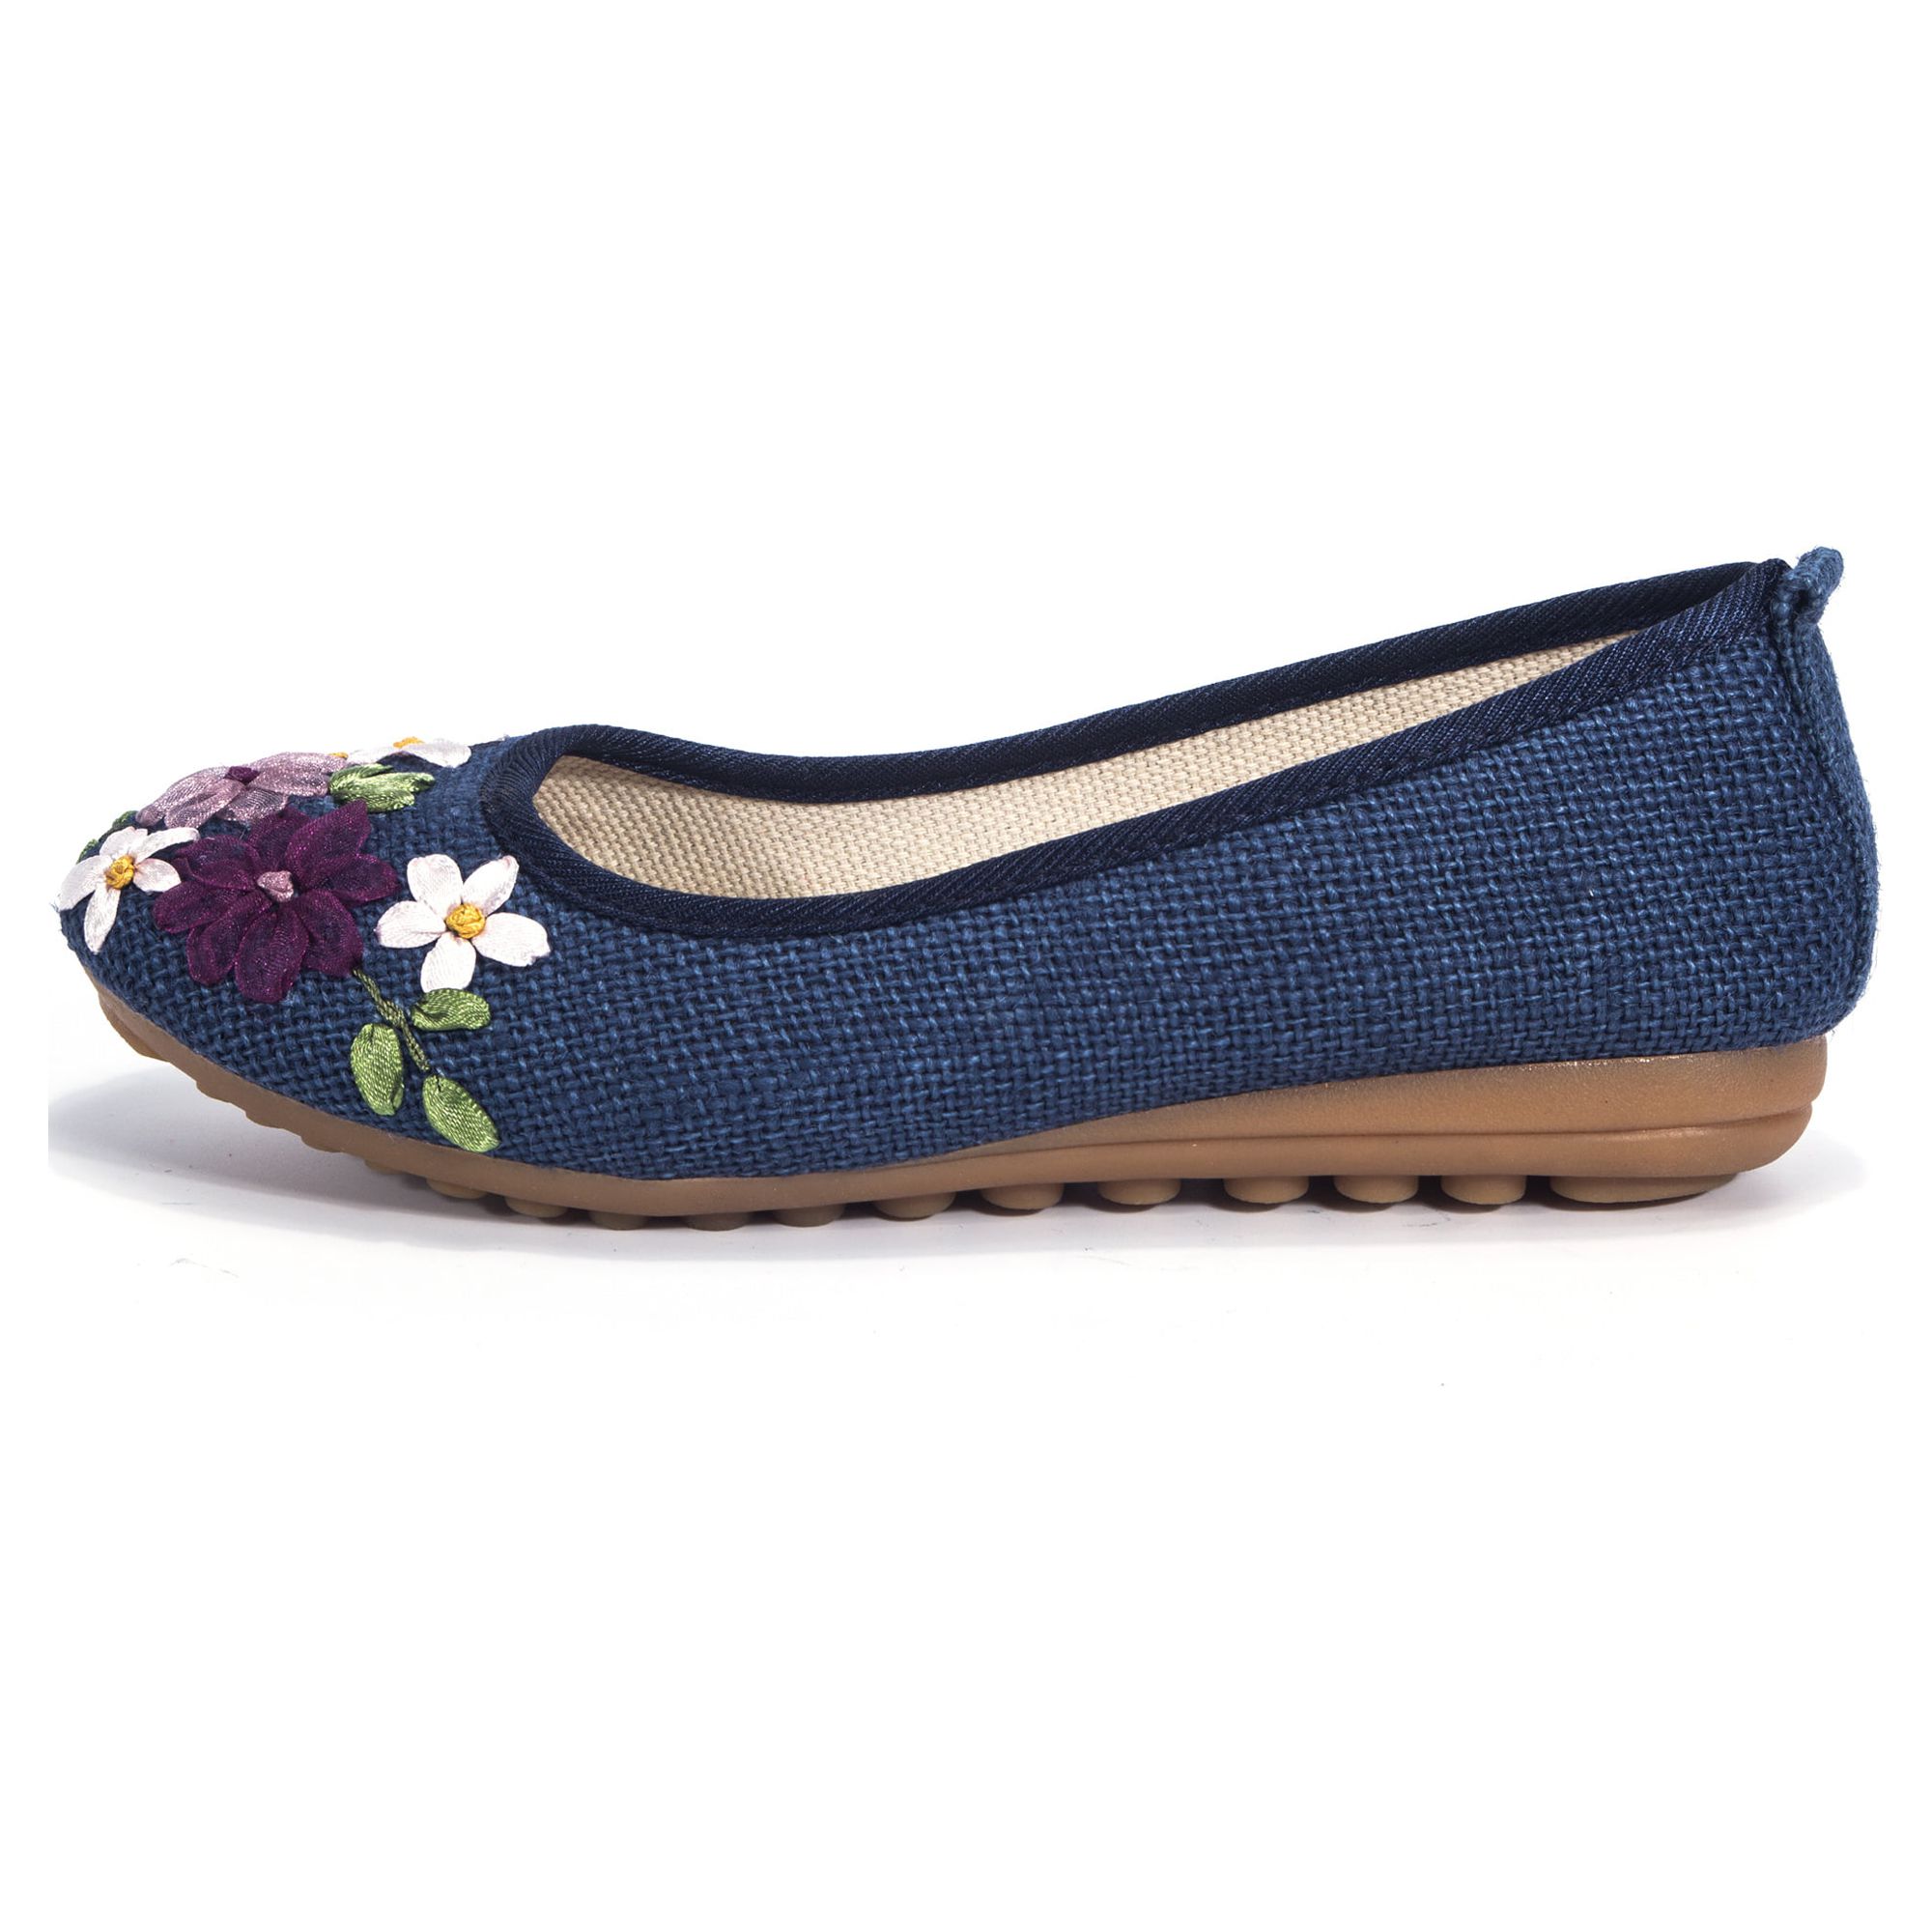 DODOING Women's Casual Fit Flat Office Shoes Non-Slip Flat Walking Shoes with Delicate Embroidery Flower Slip On Flats Shoes Round Toe Ballet Flats (4-10 Size)-Navy Blue - image 5 of 7